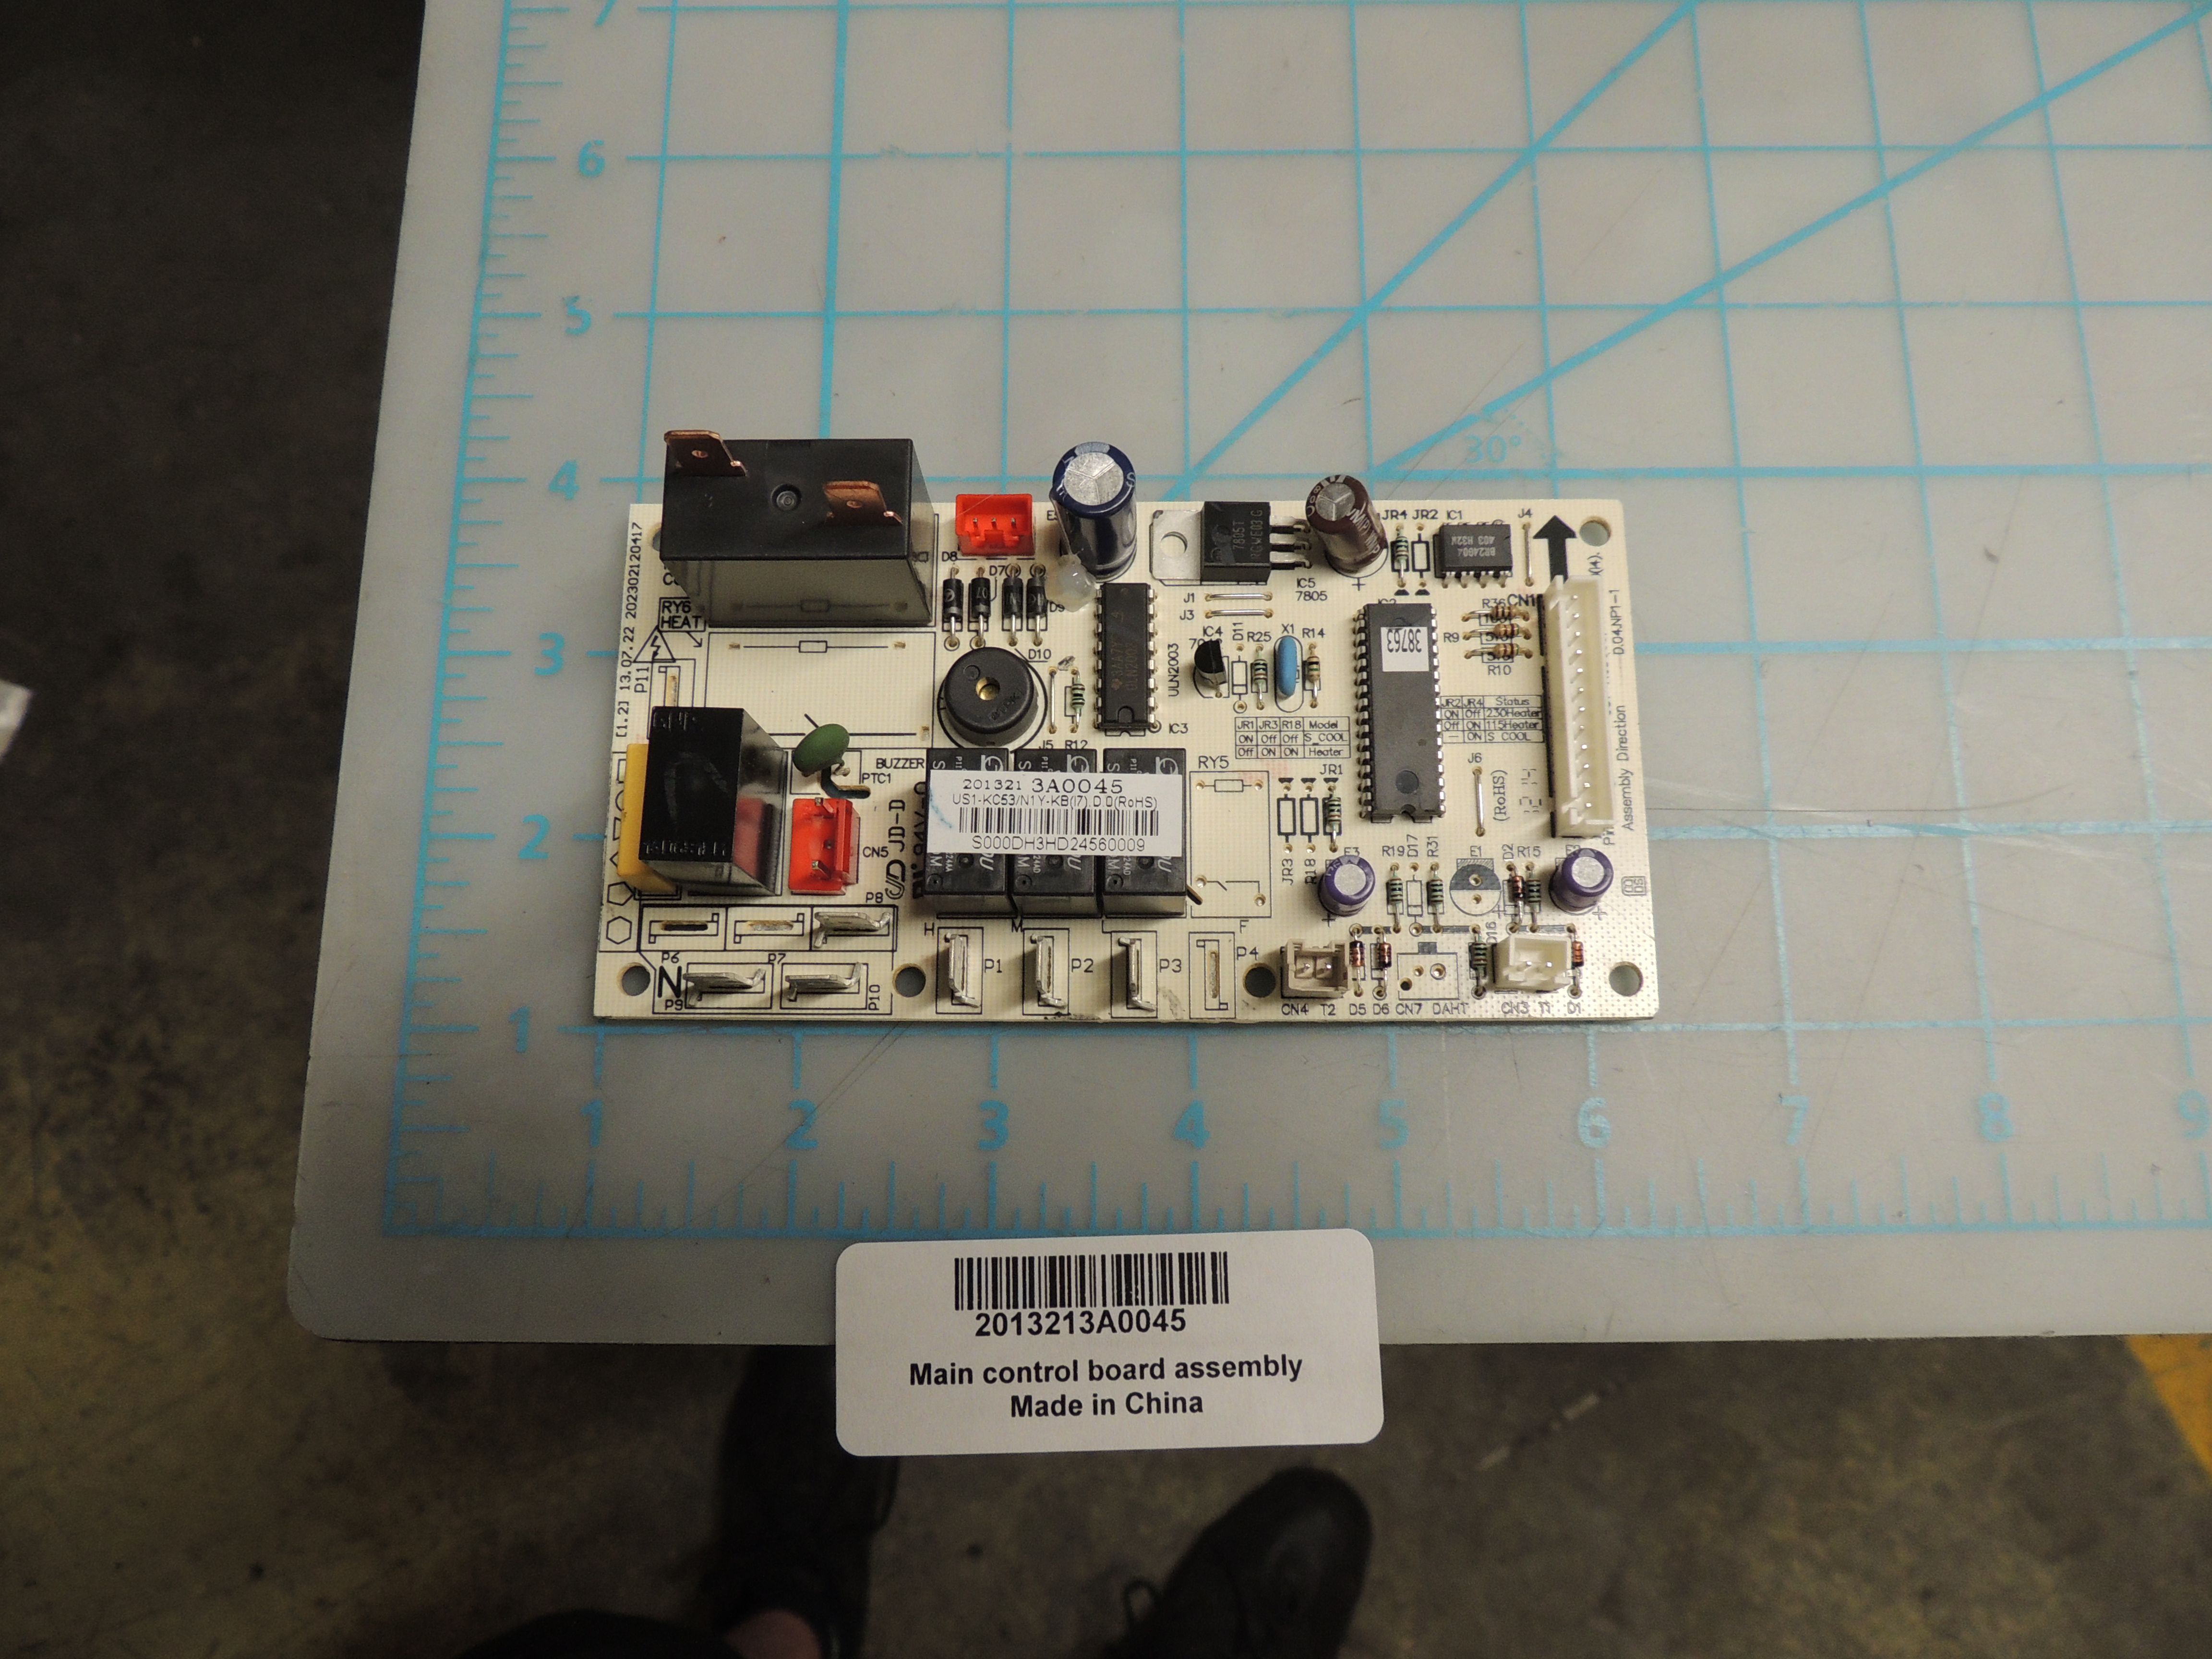 Main control board assembly